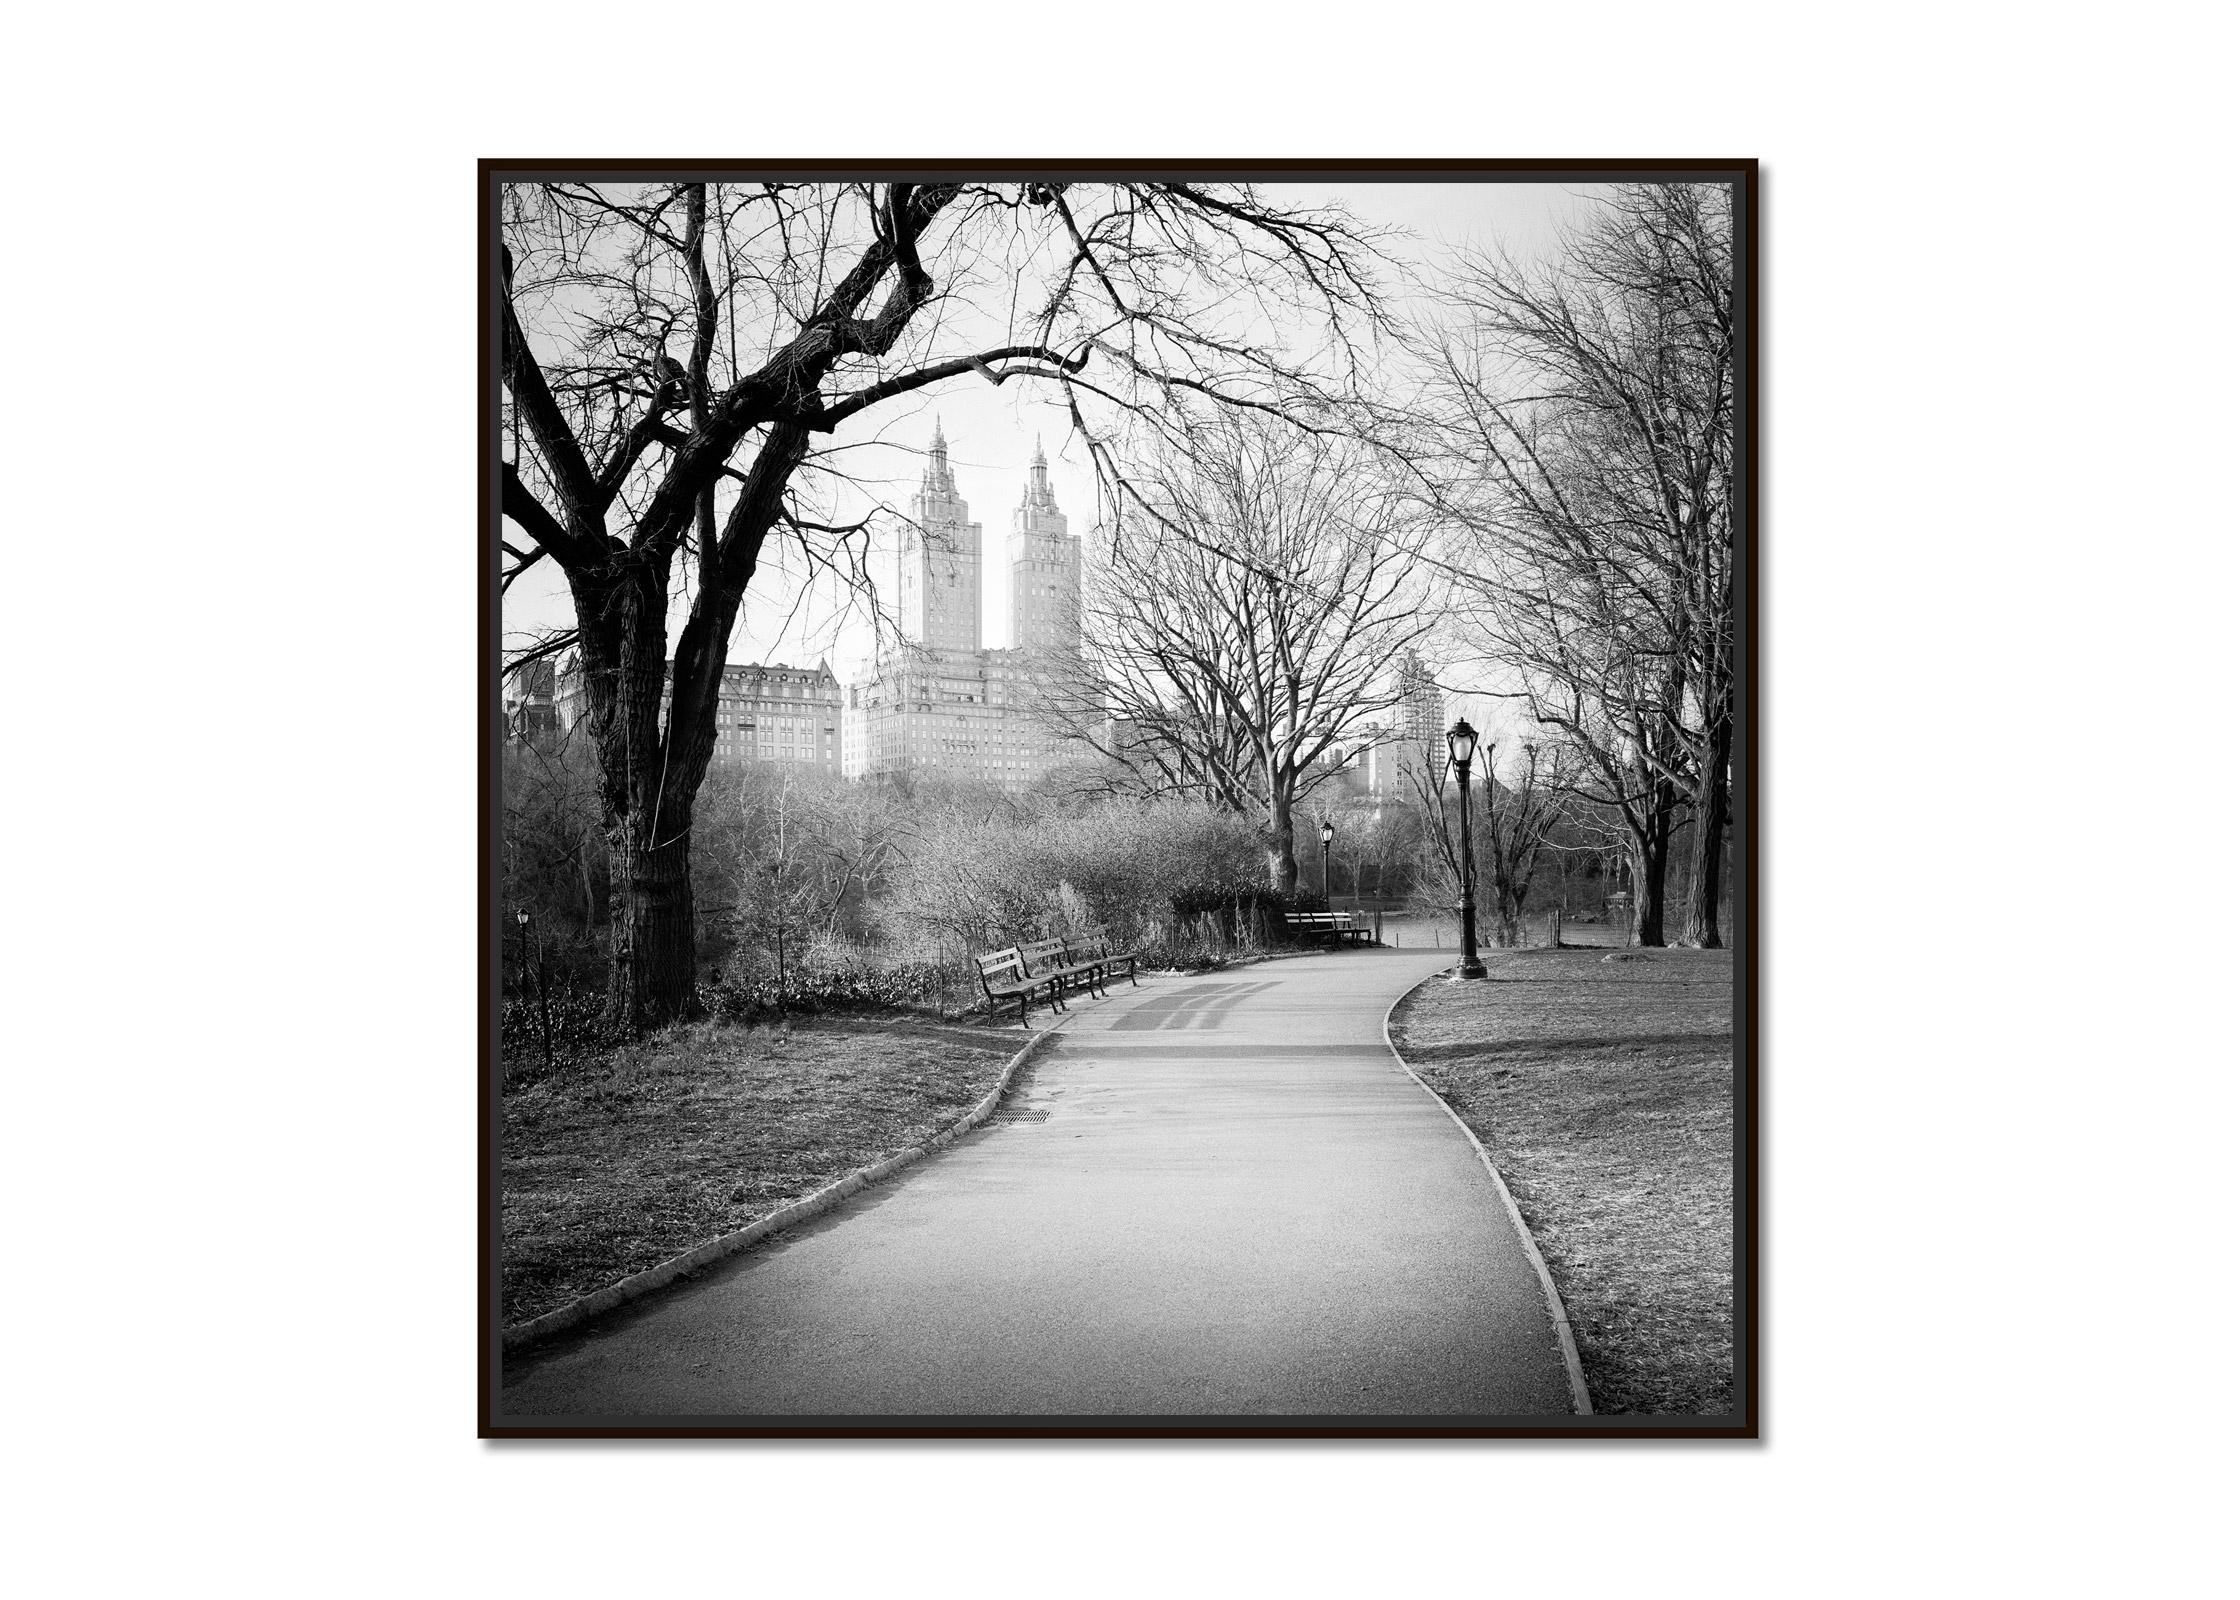 The San Remo, Central Park, New York City, black & white cityscape photography - Photograph by Gerald Berghammer